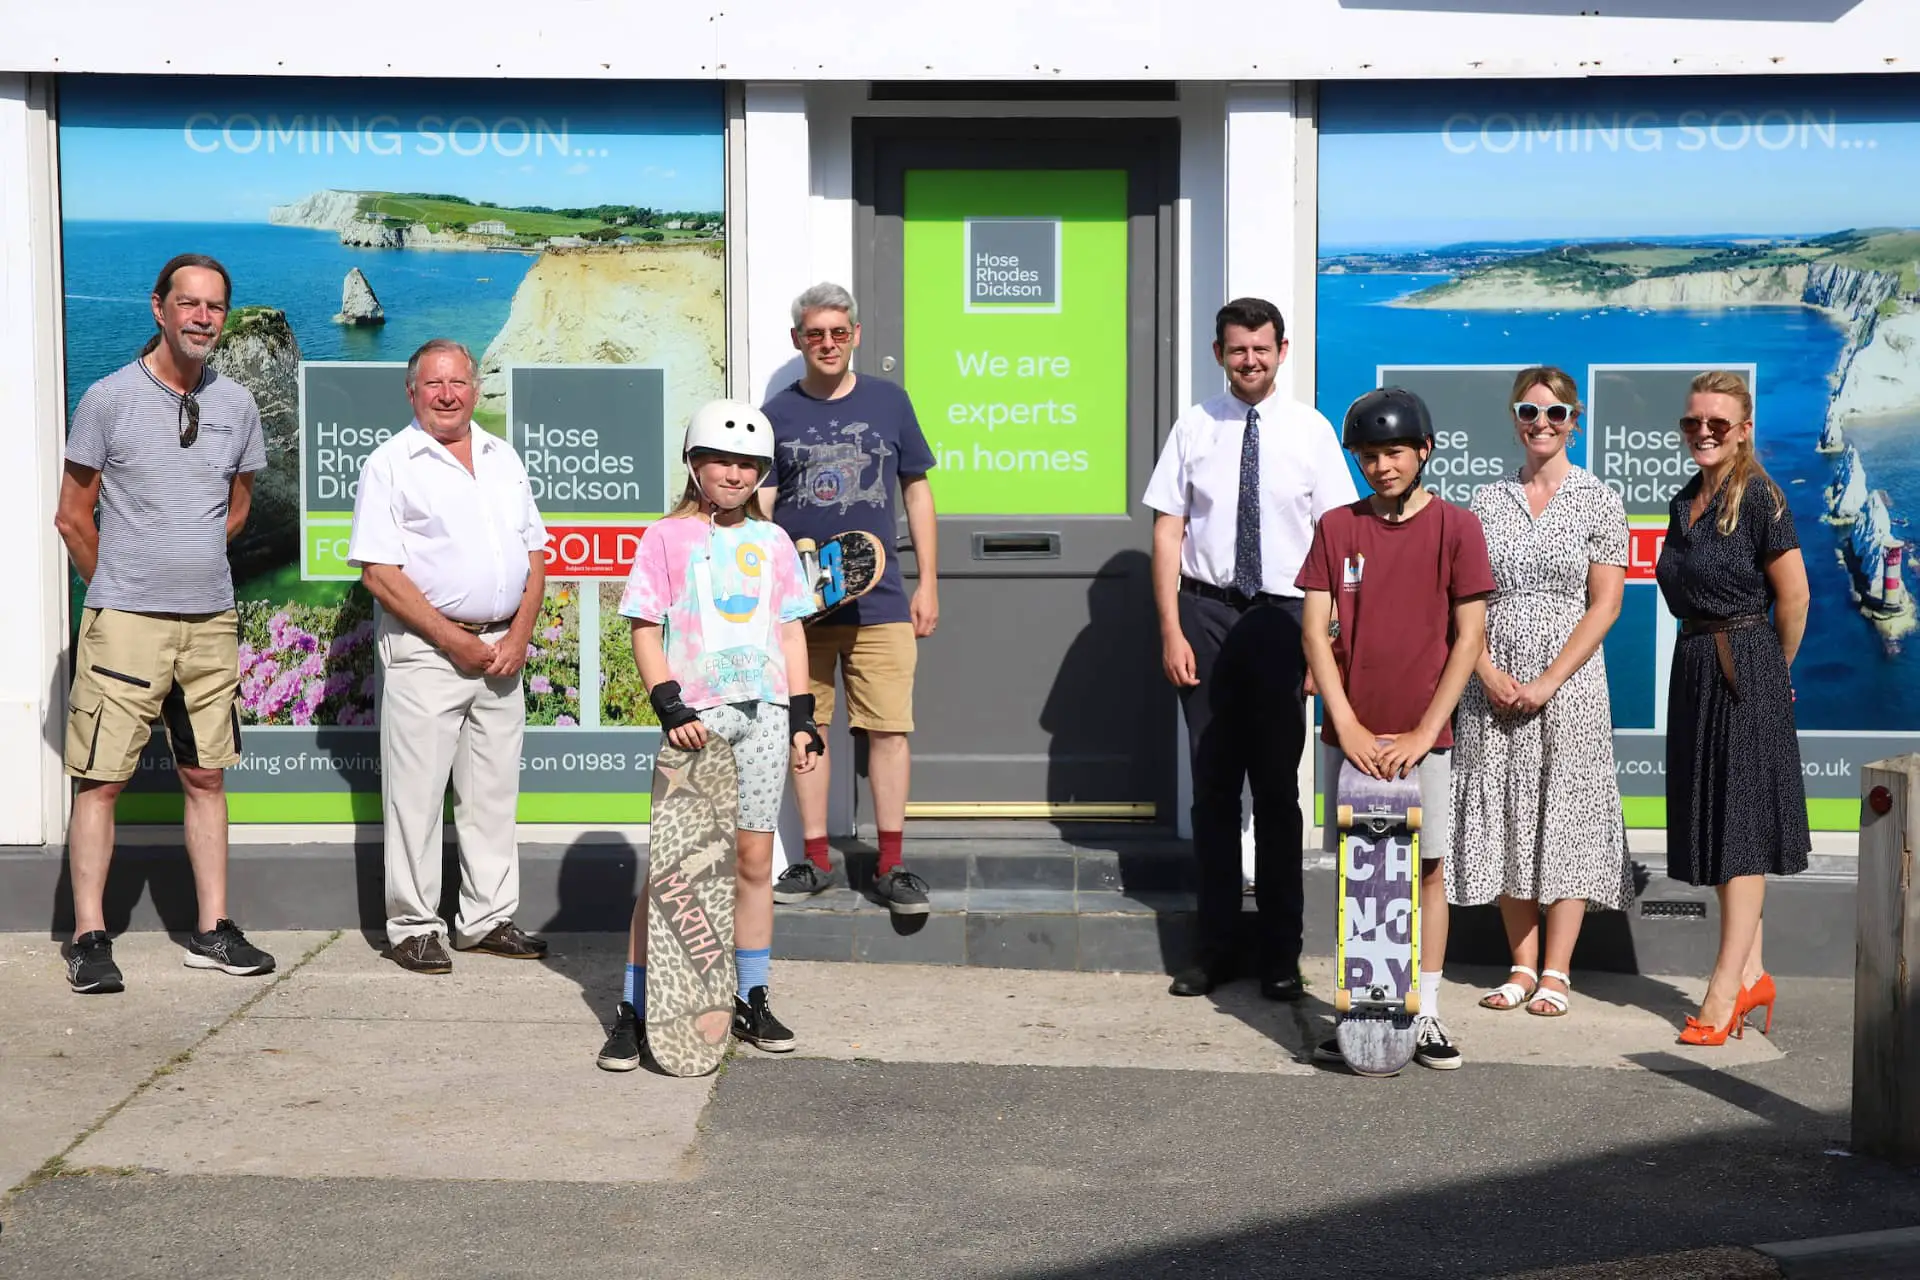 Freshwater Parish Cllr Mike Locke, Vice Chair Cllr George Cameron, Chair Cllr Daniel James, Peter Barfoot, Senior Negotiator at Hose Rhodes Dickson; Lindsay Becker Marketing Manager at Hose Rhodes Dickson and Michelle Walker, Negotiator at Hose Rhodes Dickson. Martha Eggleton 10 and Jago Tasker 12 wearing Freshwater Skatepark t-shirts Ollie in front of the new premises